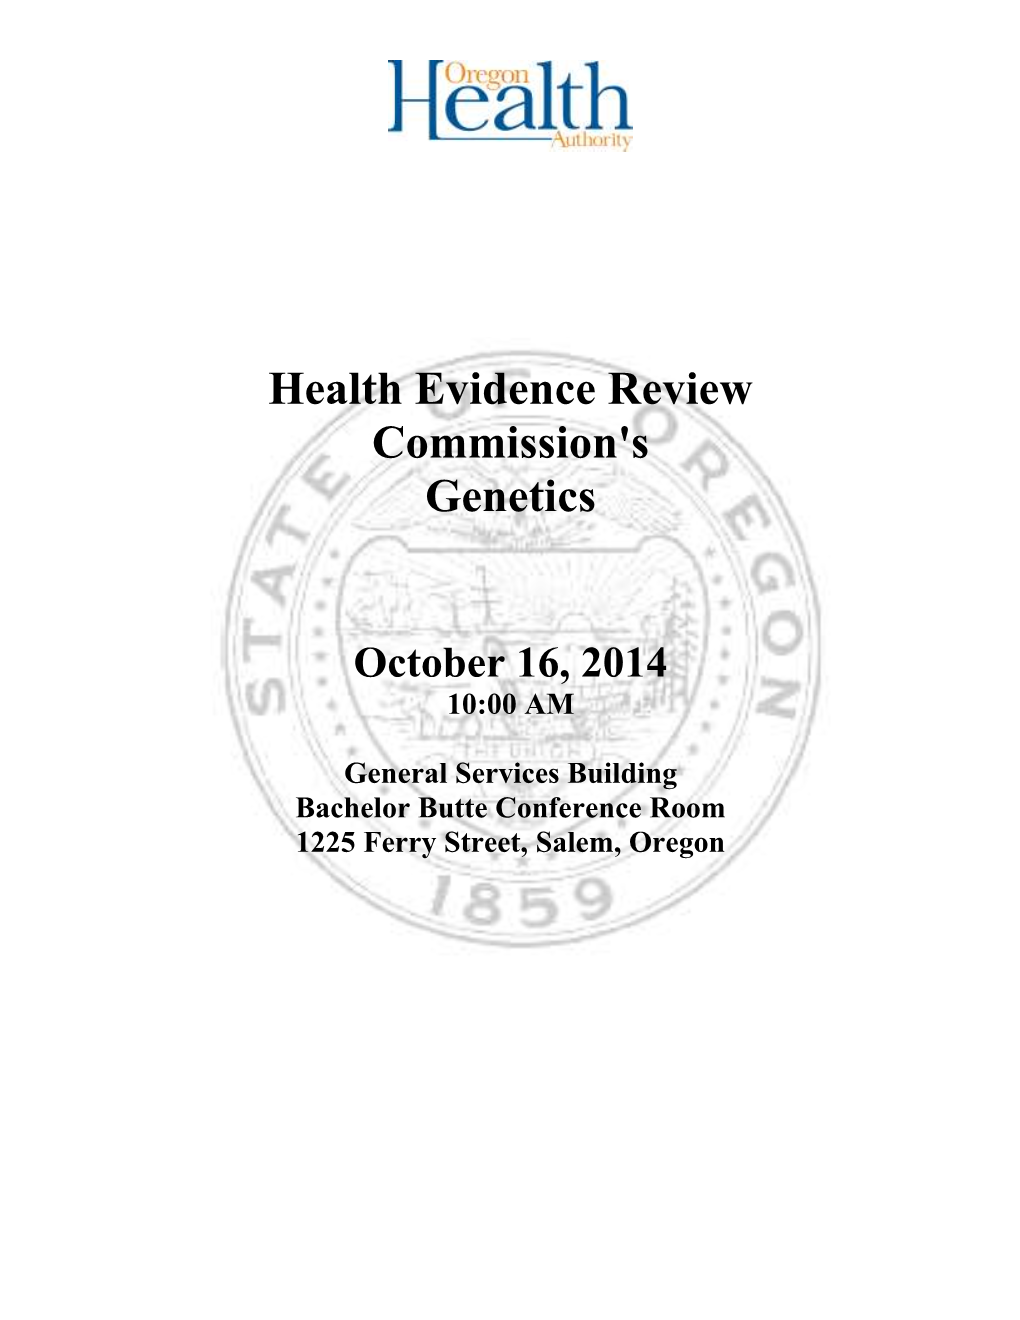 Health Evidence Review Commission's Genetics